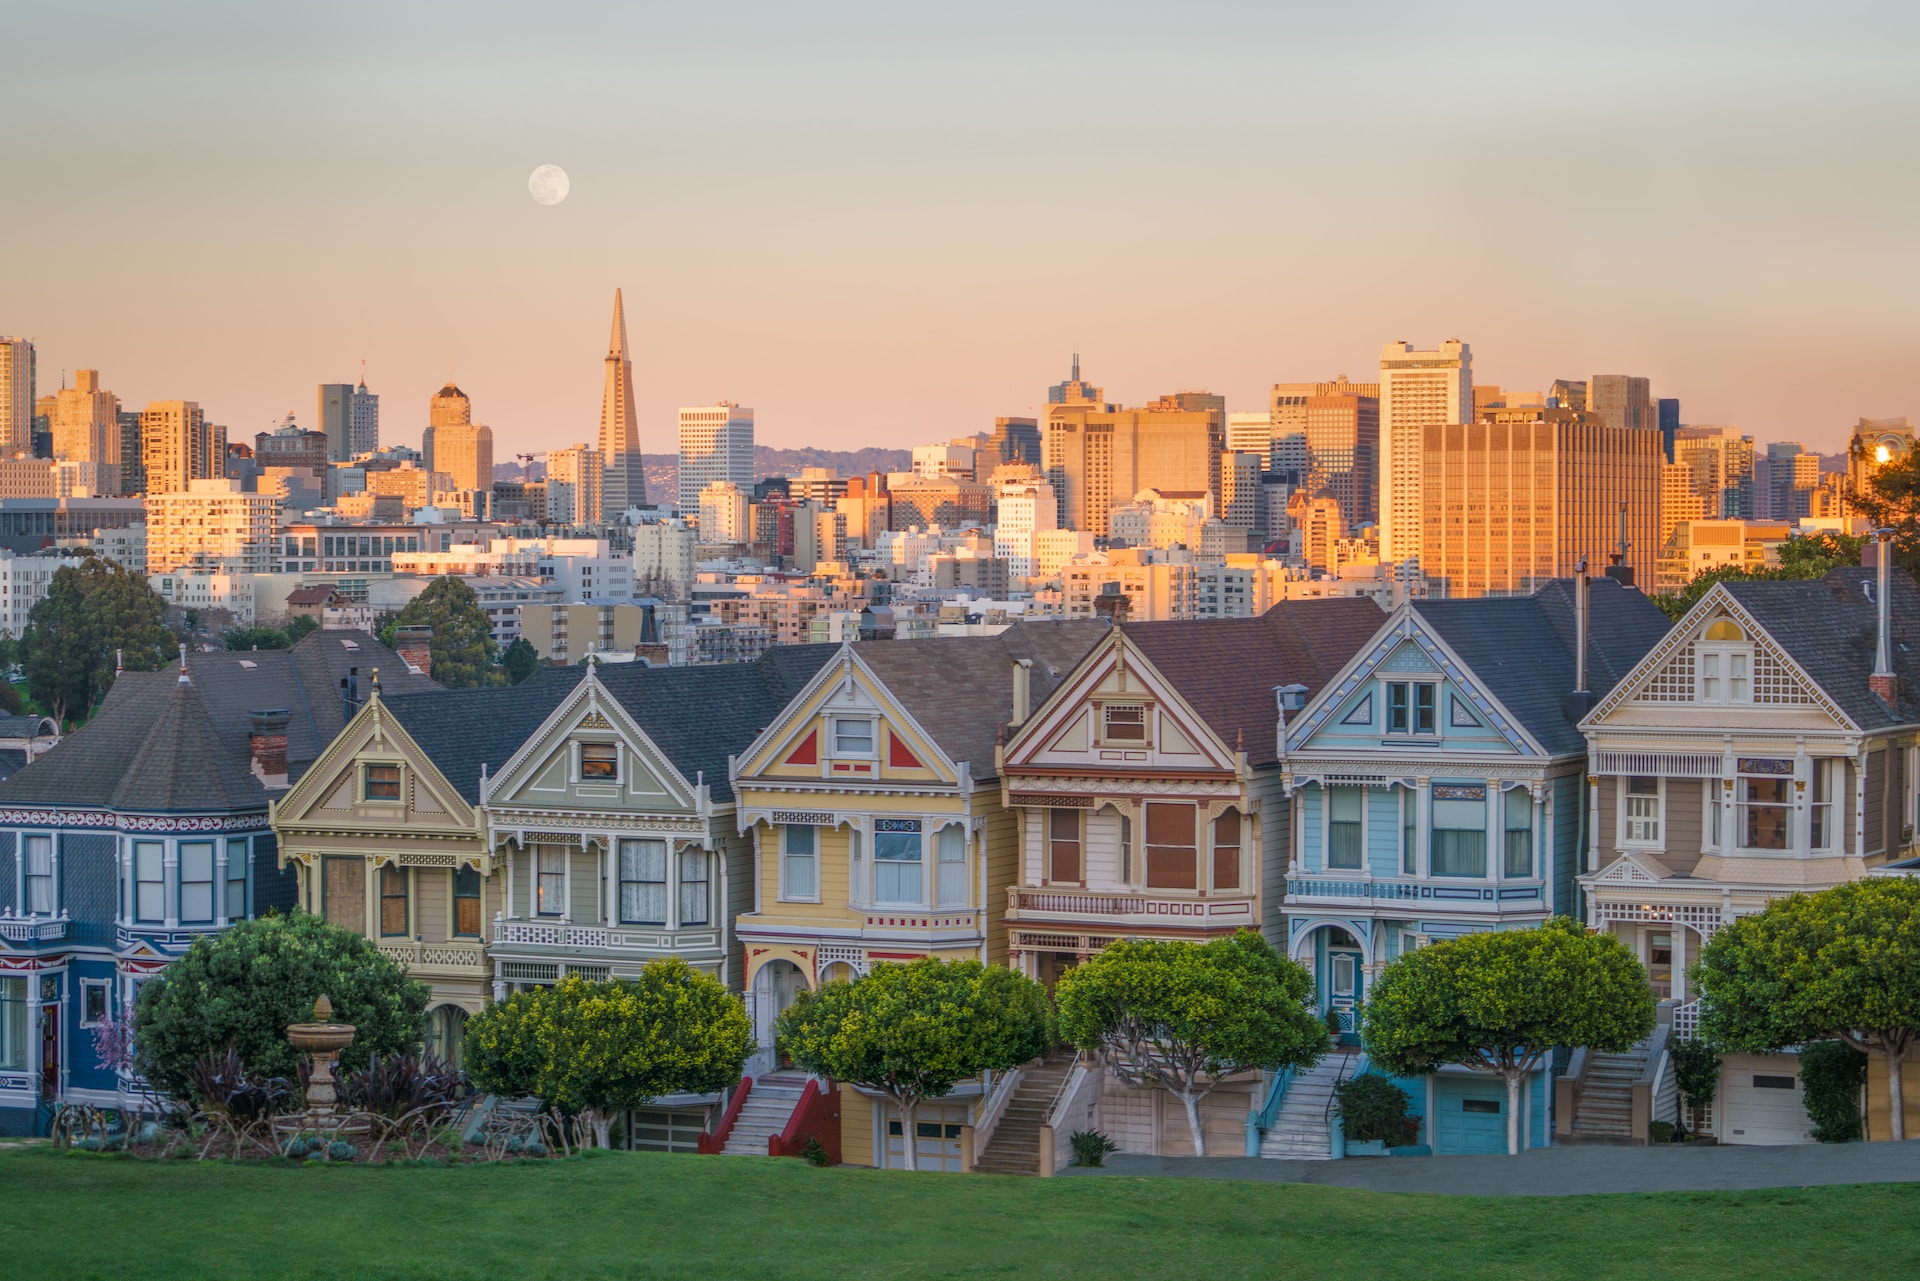 A setting moon above the famous Painted Ladies, adding even more beauty to this breathtaking San Francisco view.